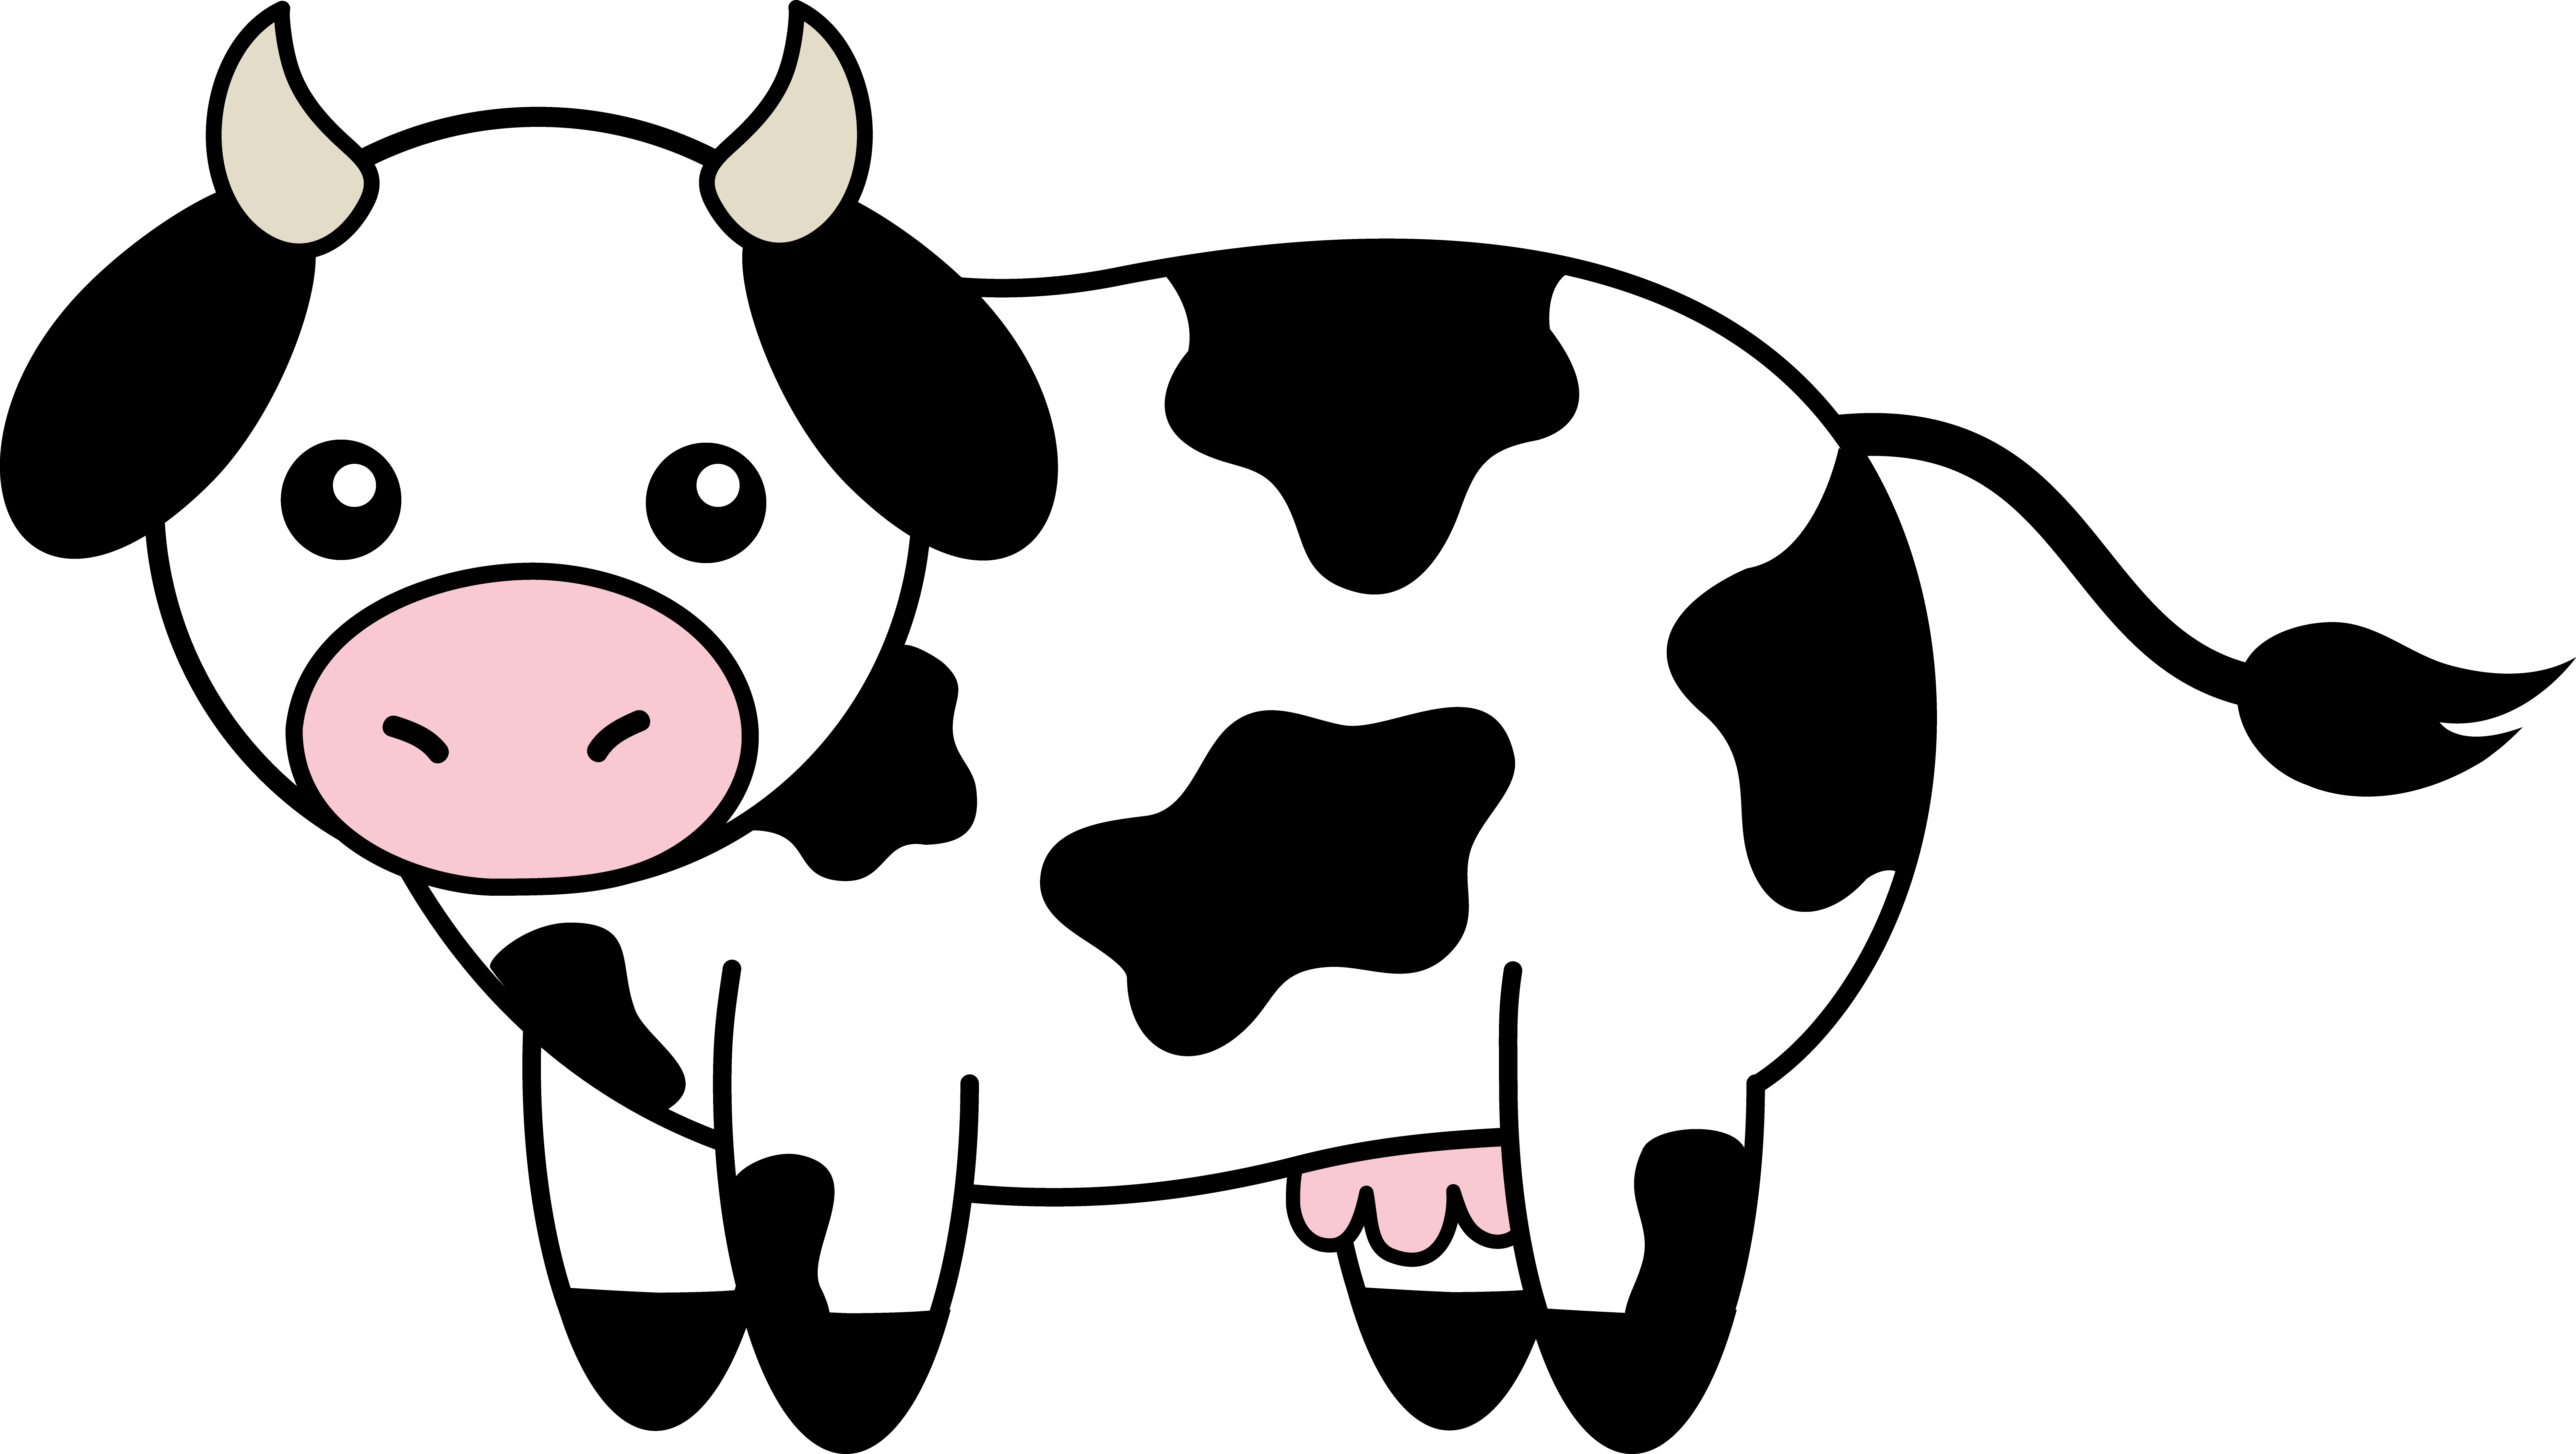 Cow 3 small clipart 300pixel 